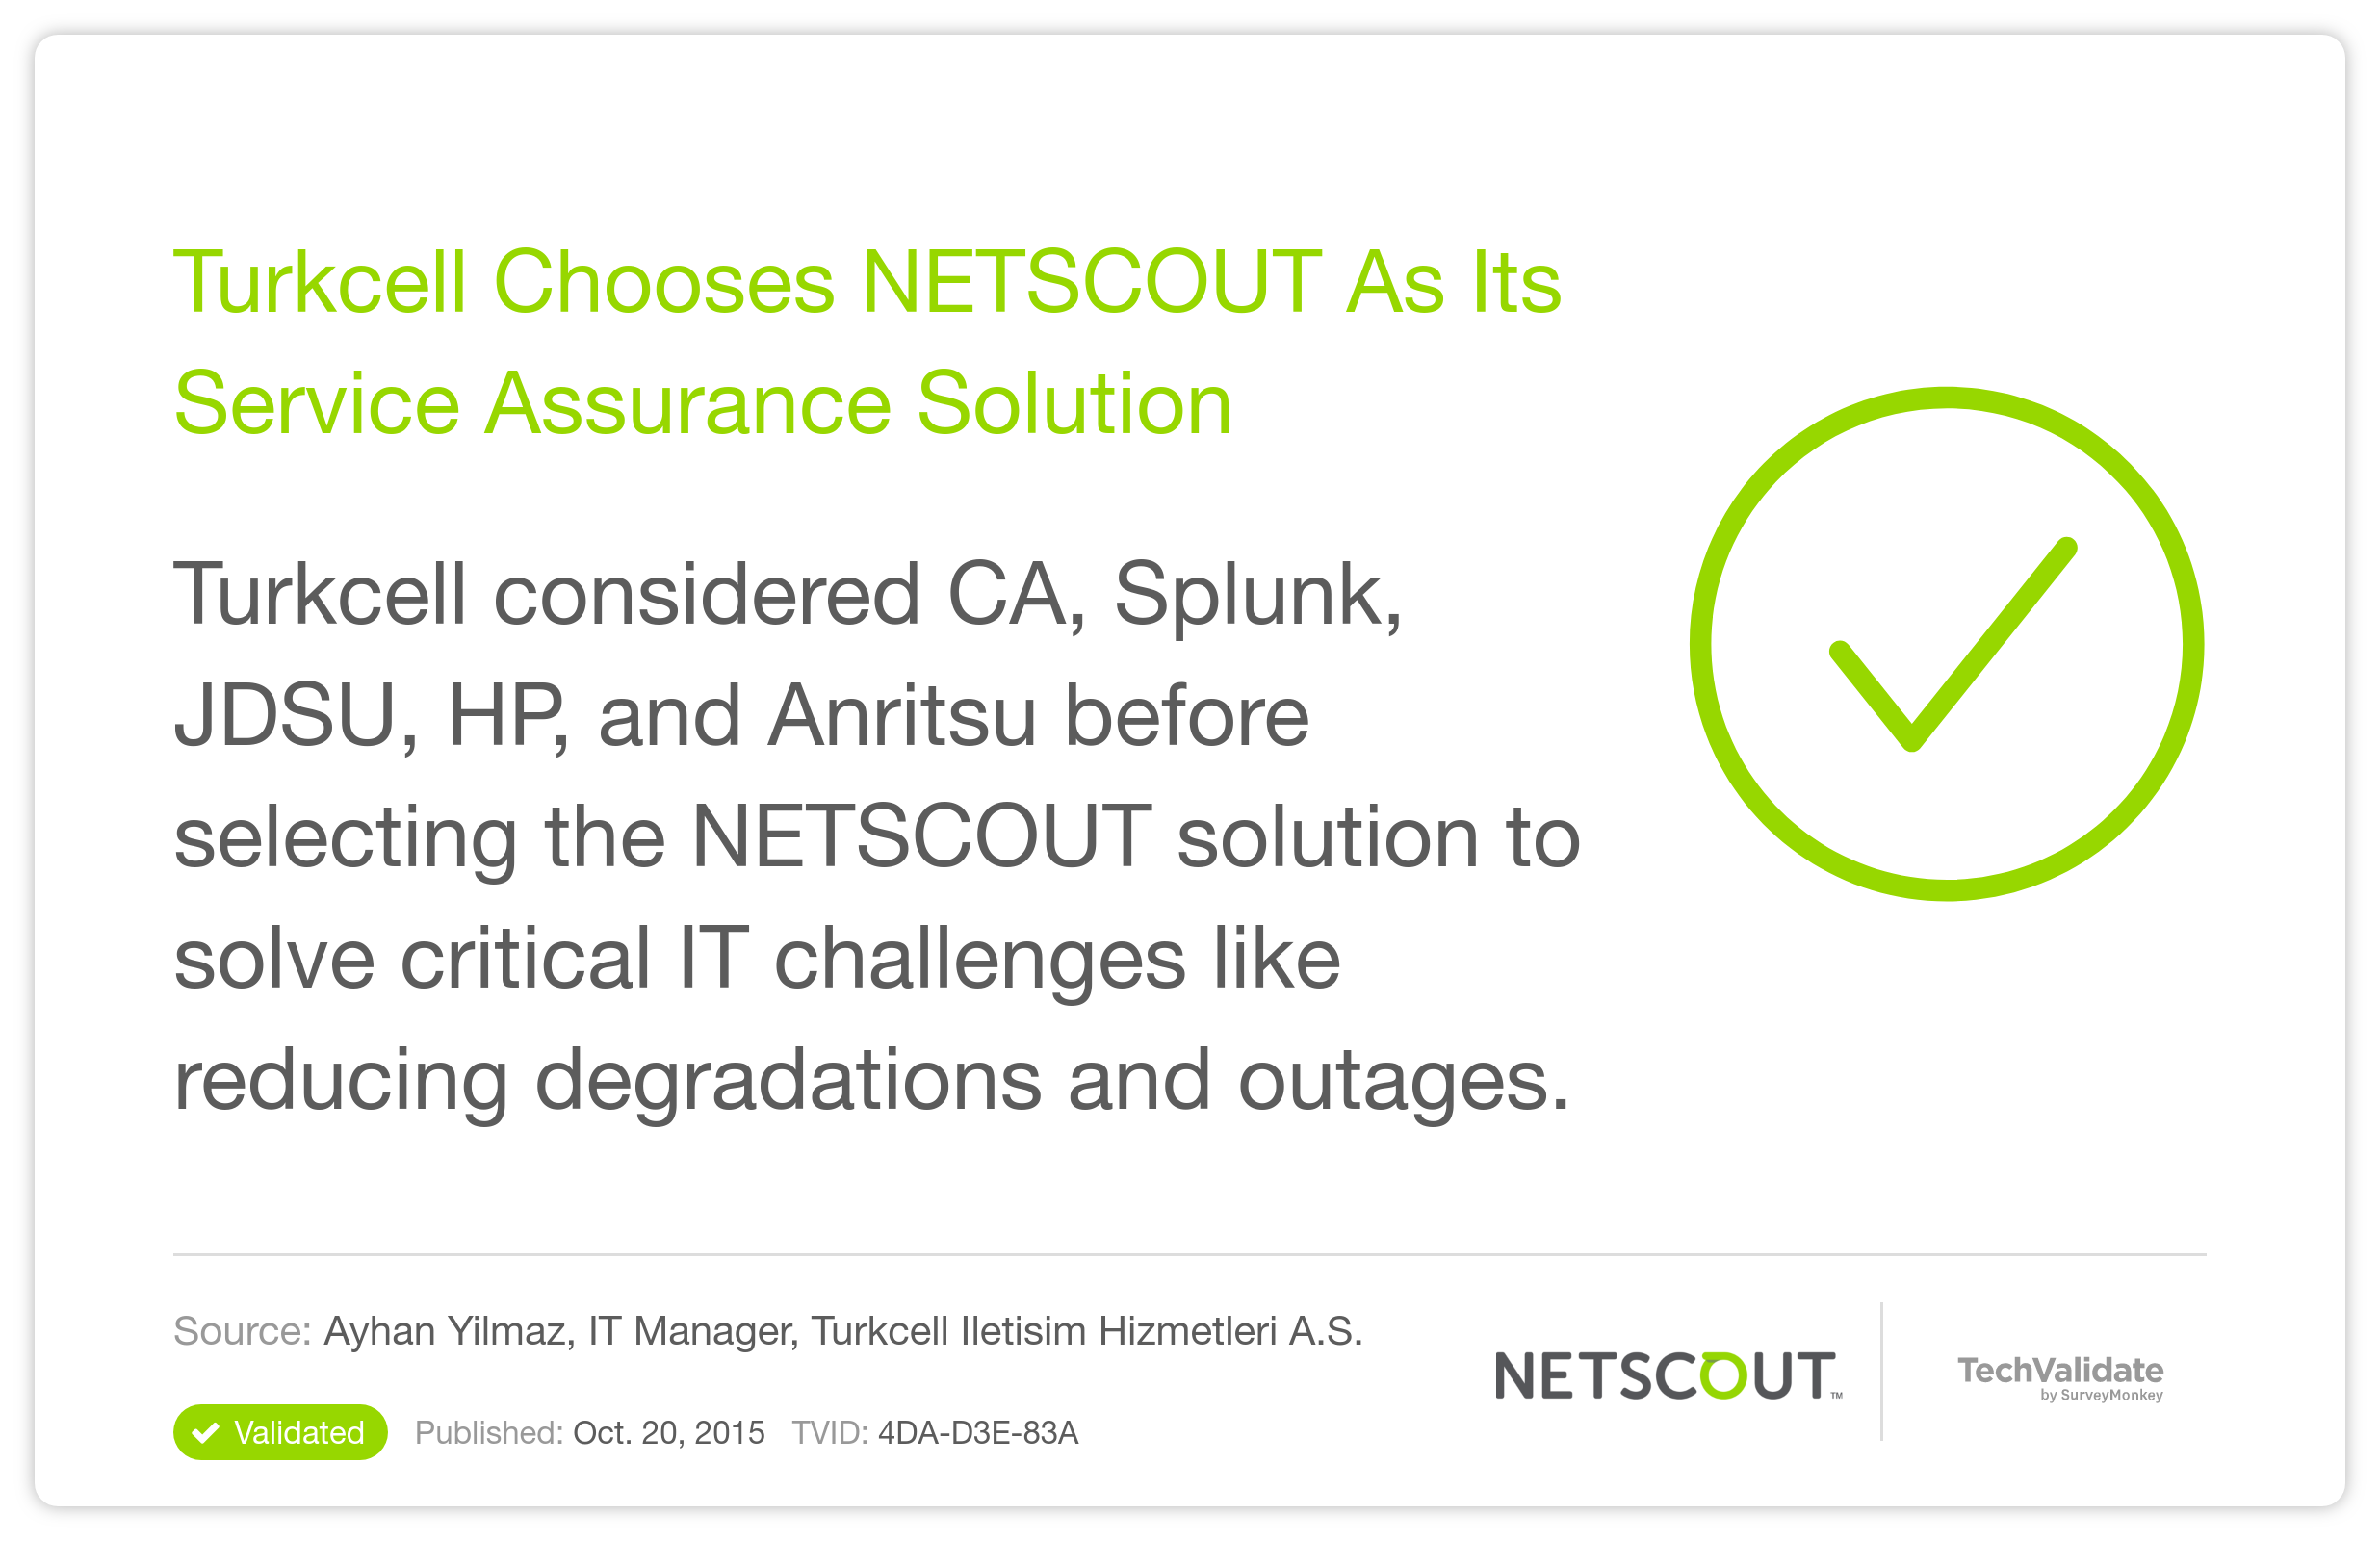 Turkcell Chooses NETSCOUT As Its Service Assurance Solution